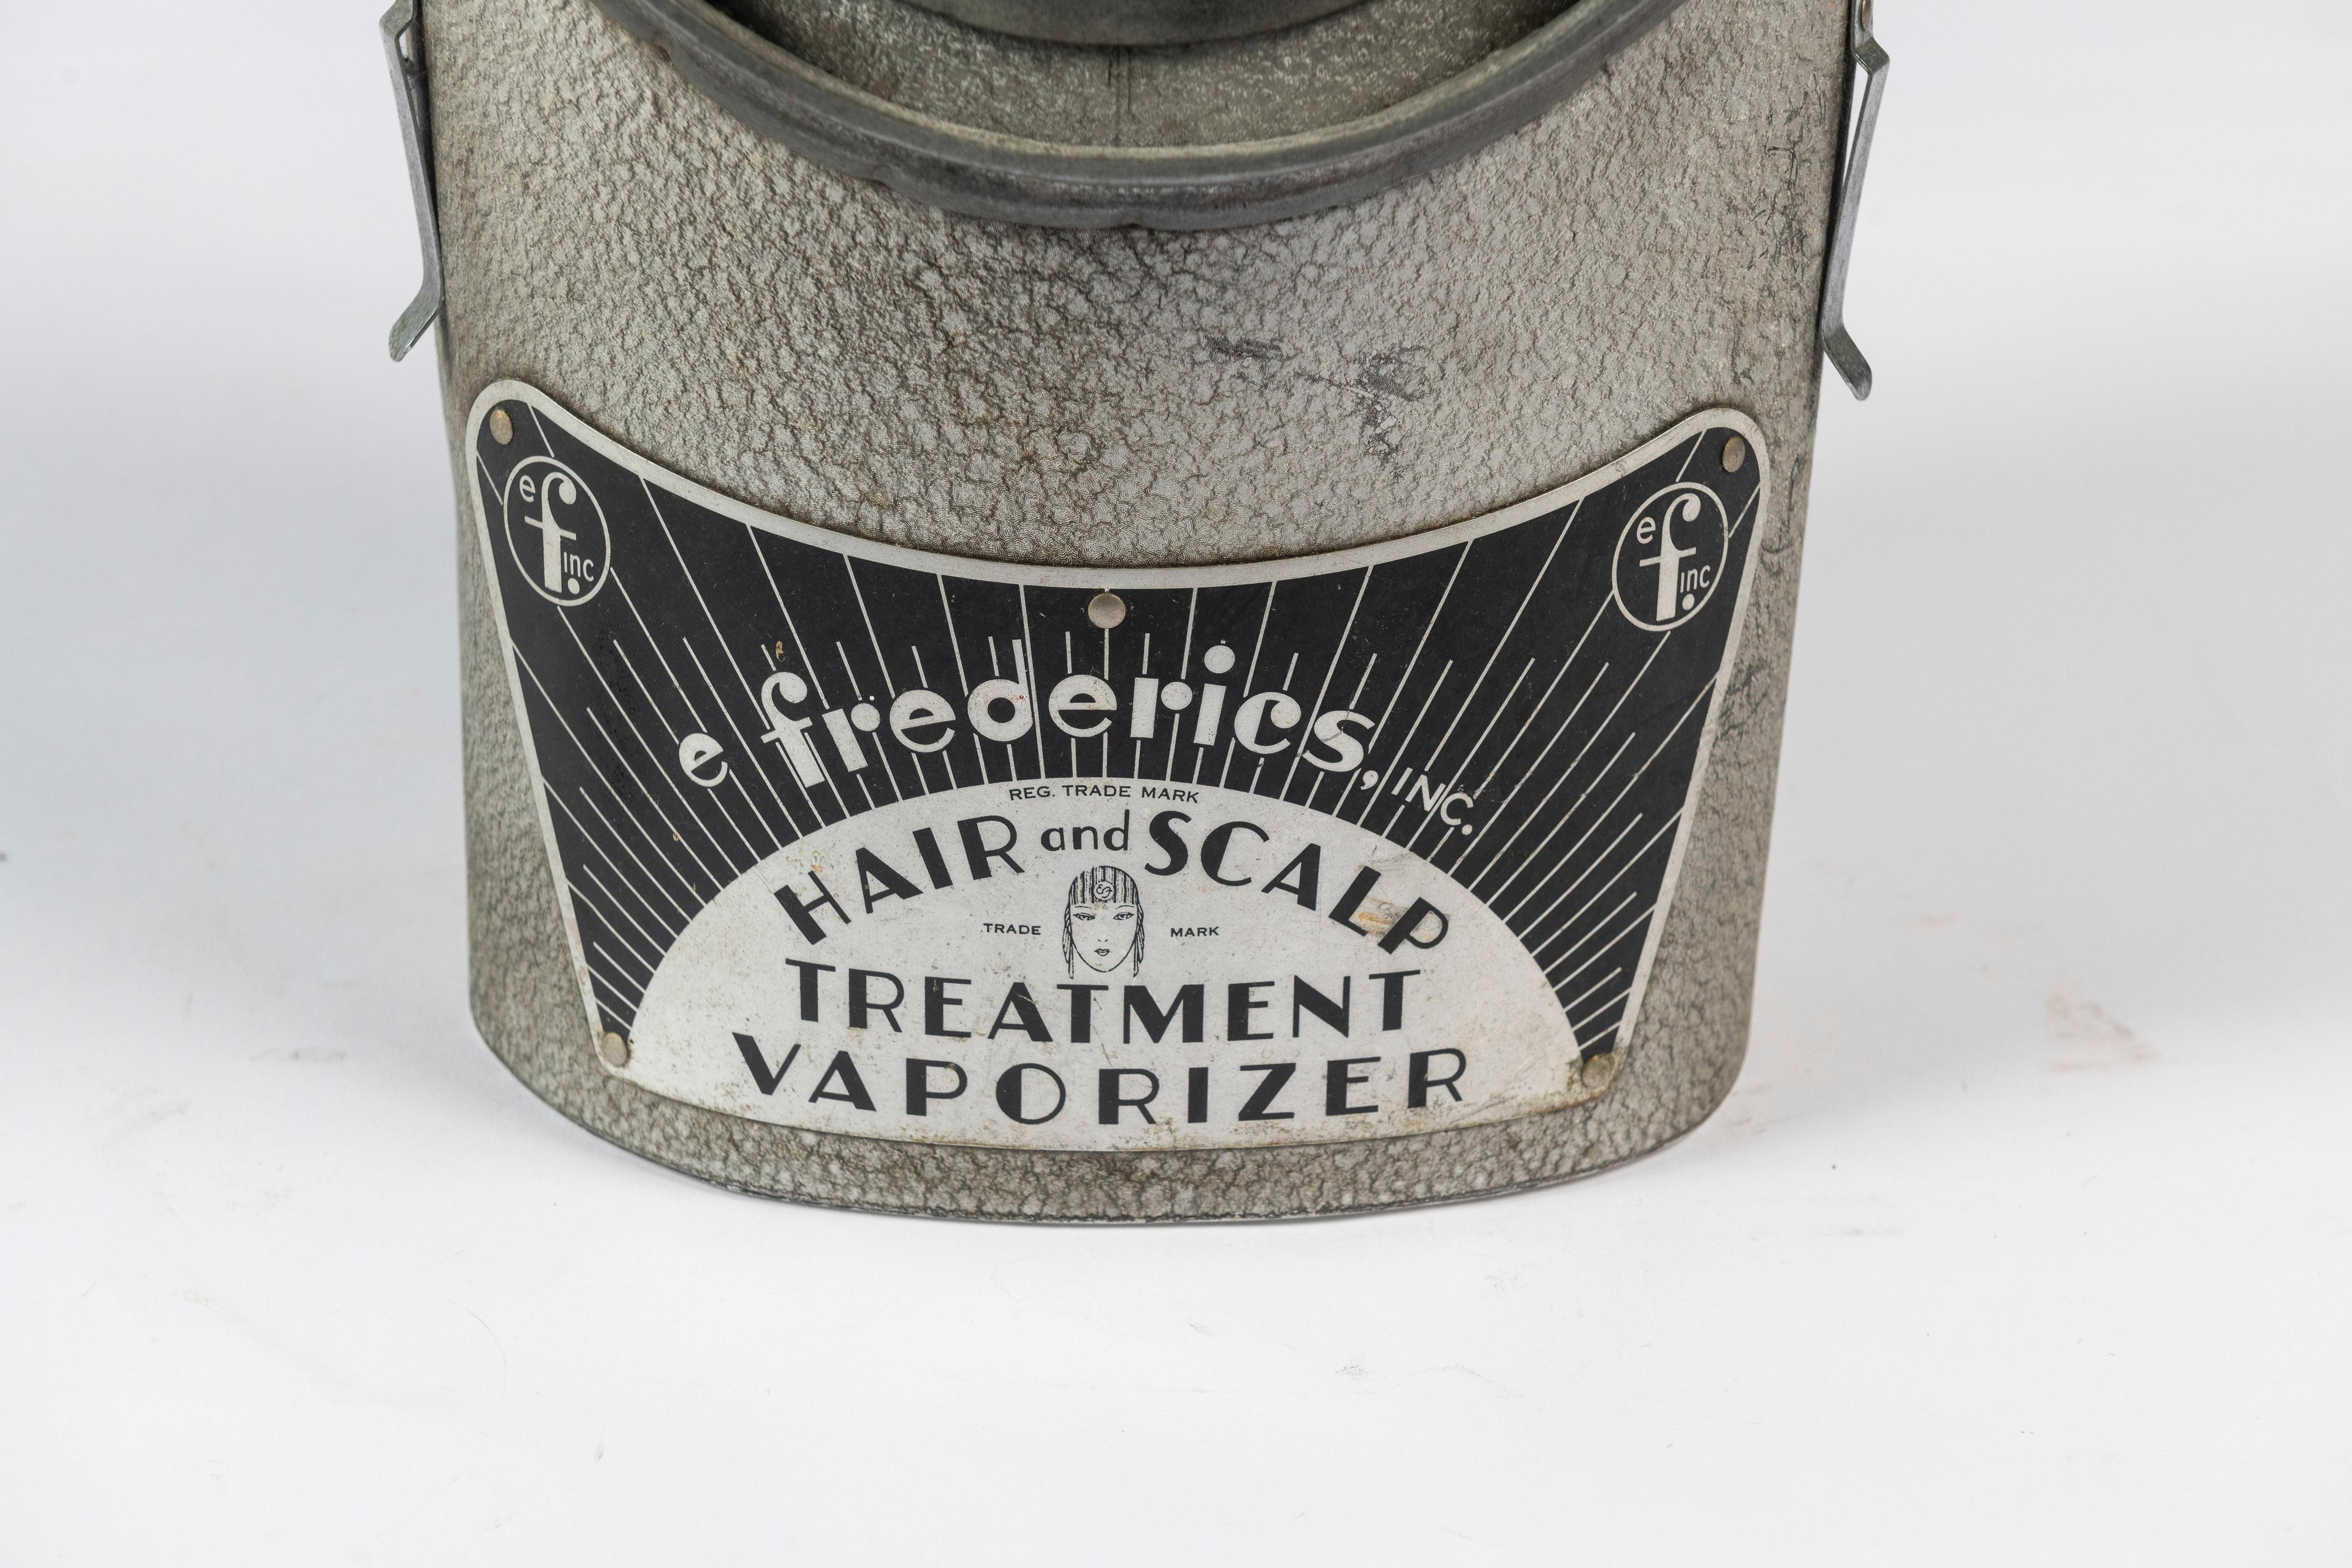 American Vintage Hood for e. Frederics Hair and Scalp Treatment Vaporizer, 1930's For Sale